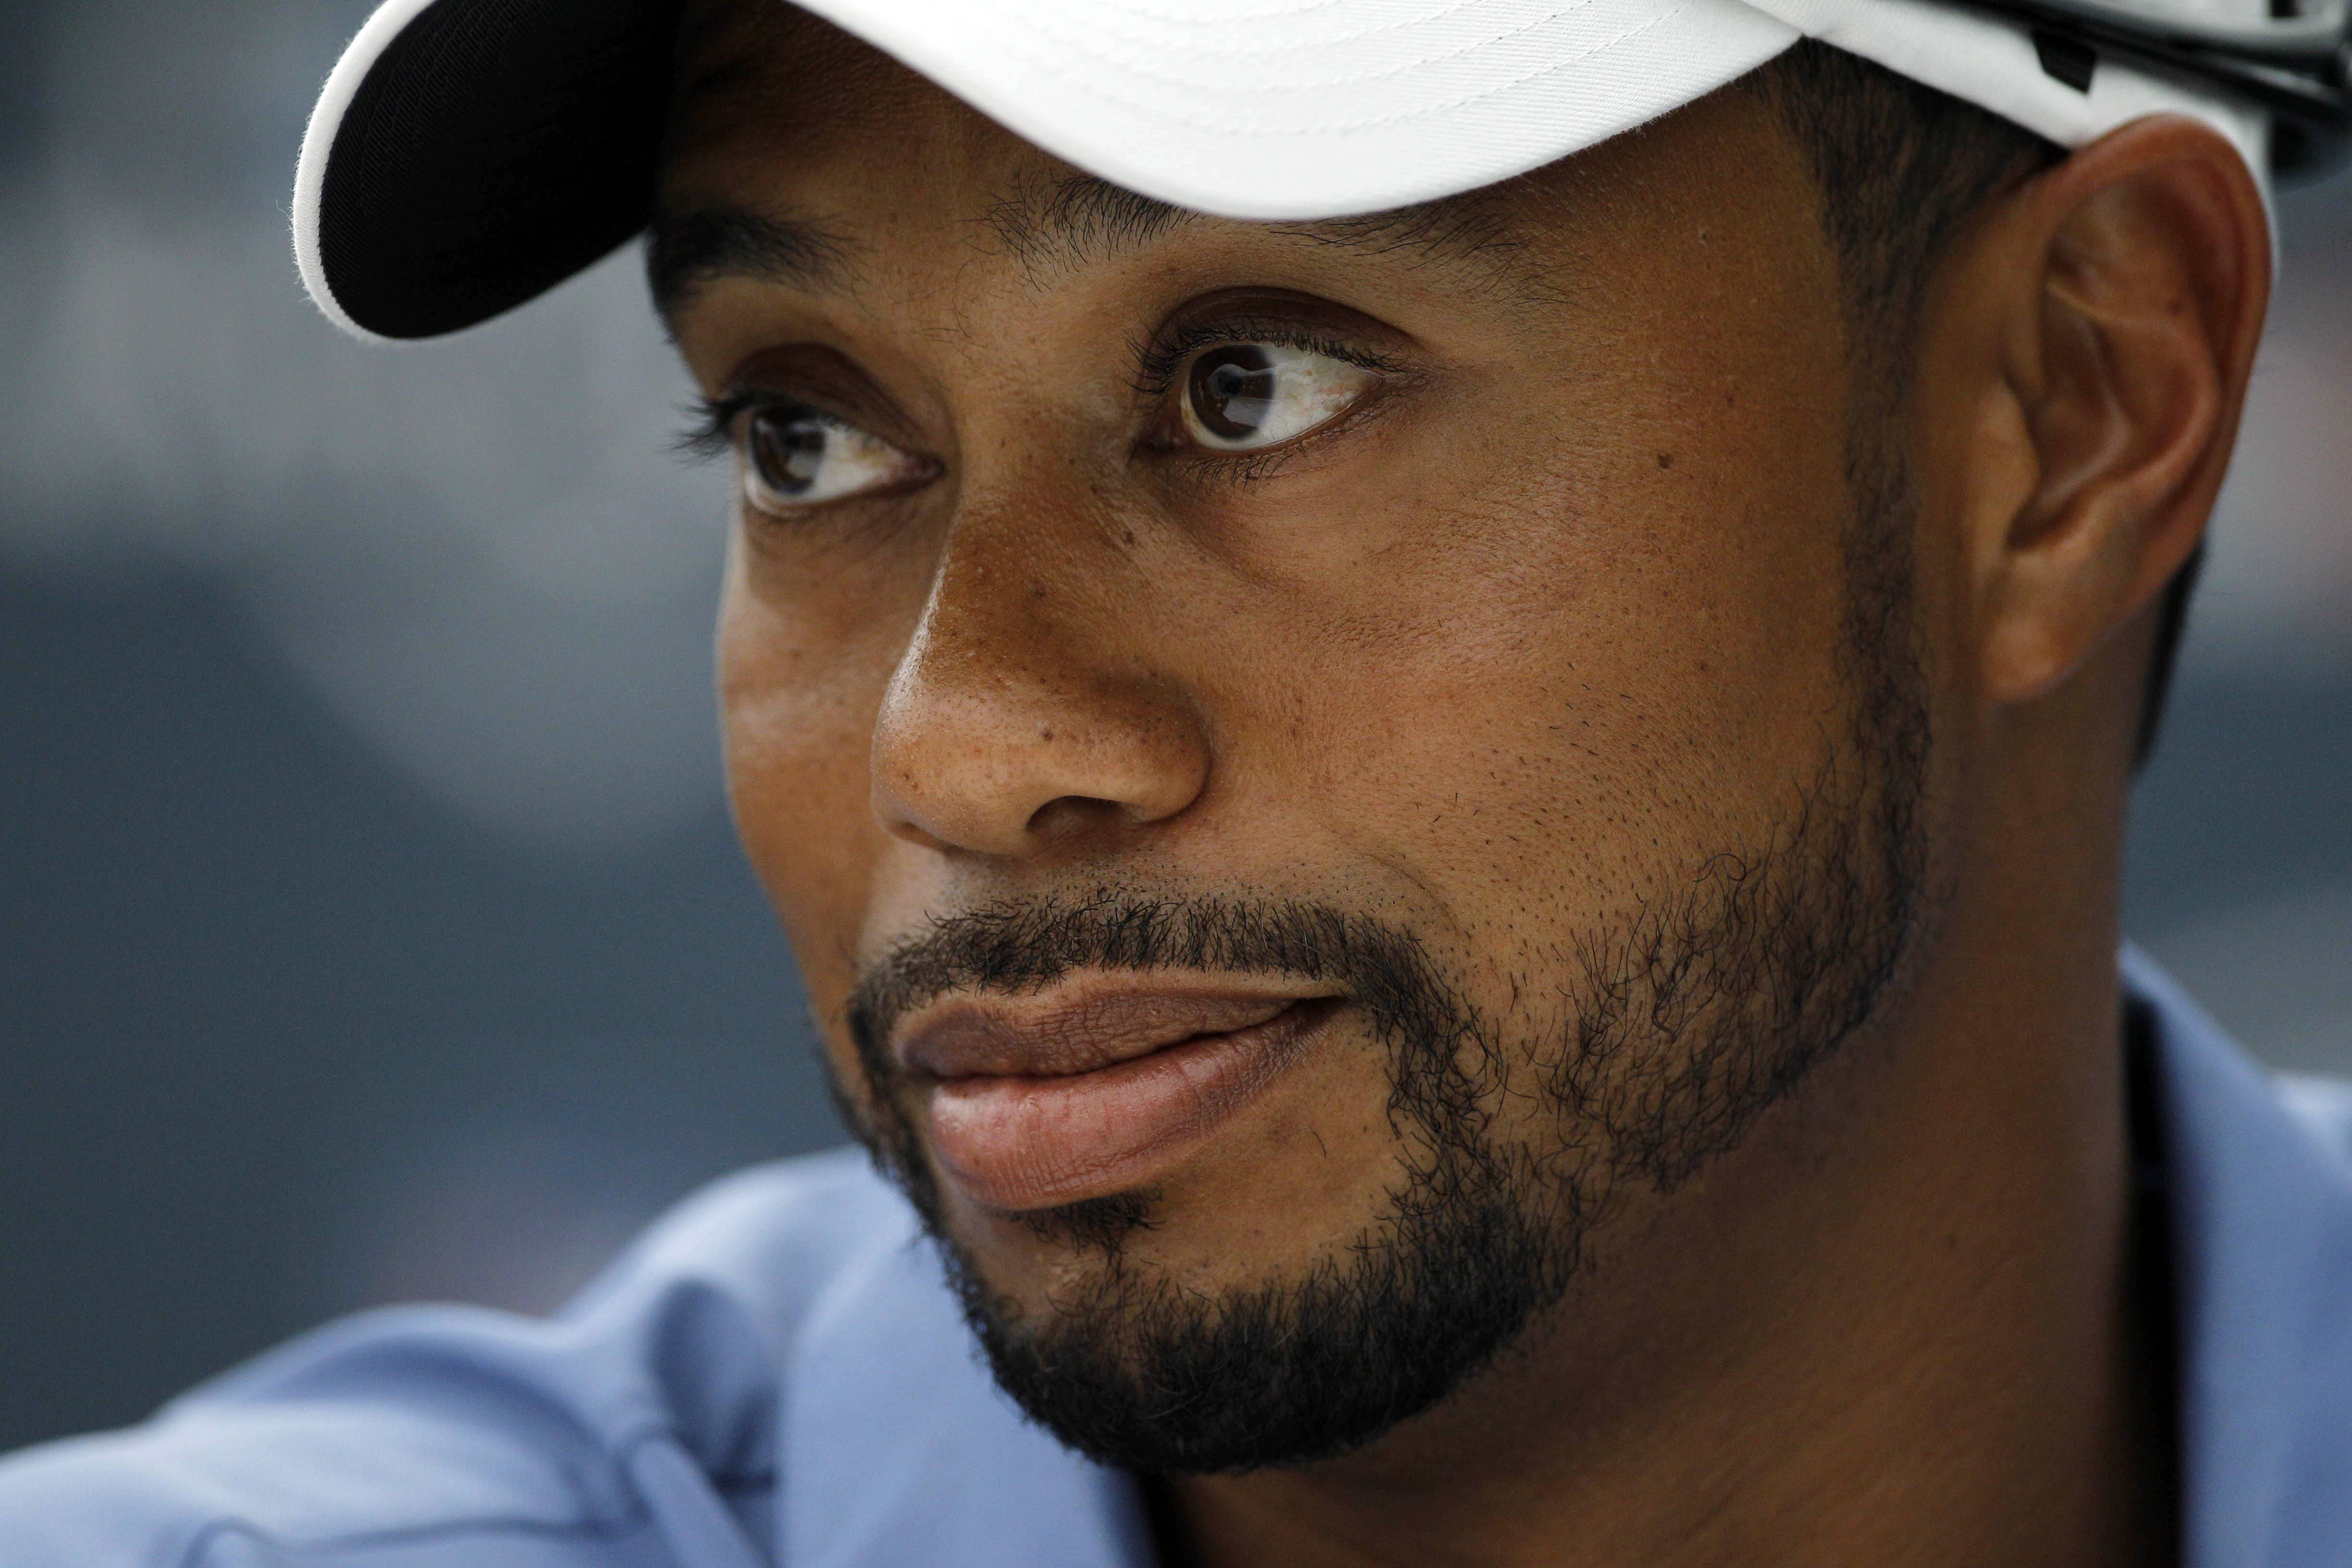 Does Tiger Woods Have Money Woes? - A new report in Fortune magazine suggests that money is getting a little tight for golf star Tiger Woods. &quot;It's no secret that Woods...has suffered financially since his fall from grace. His endorsement list shrank and his marriage ended in a divorce settlement reportedly worth $100 million,&quot; the magazine reported. &quot;But now he may actually be hurting for funds. At the very least, there are signs that he isn't generating enough to comfortably cover his costs.&quot; However Woods' agent emailed the mag afterwards stating that he's &quot;financially sound&quot; and that stating anything else is &quot;incorrect and factually baseless.&quot;(Photo: AP Photo/Matt Rourke, file)